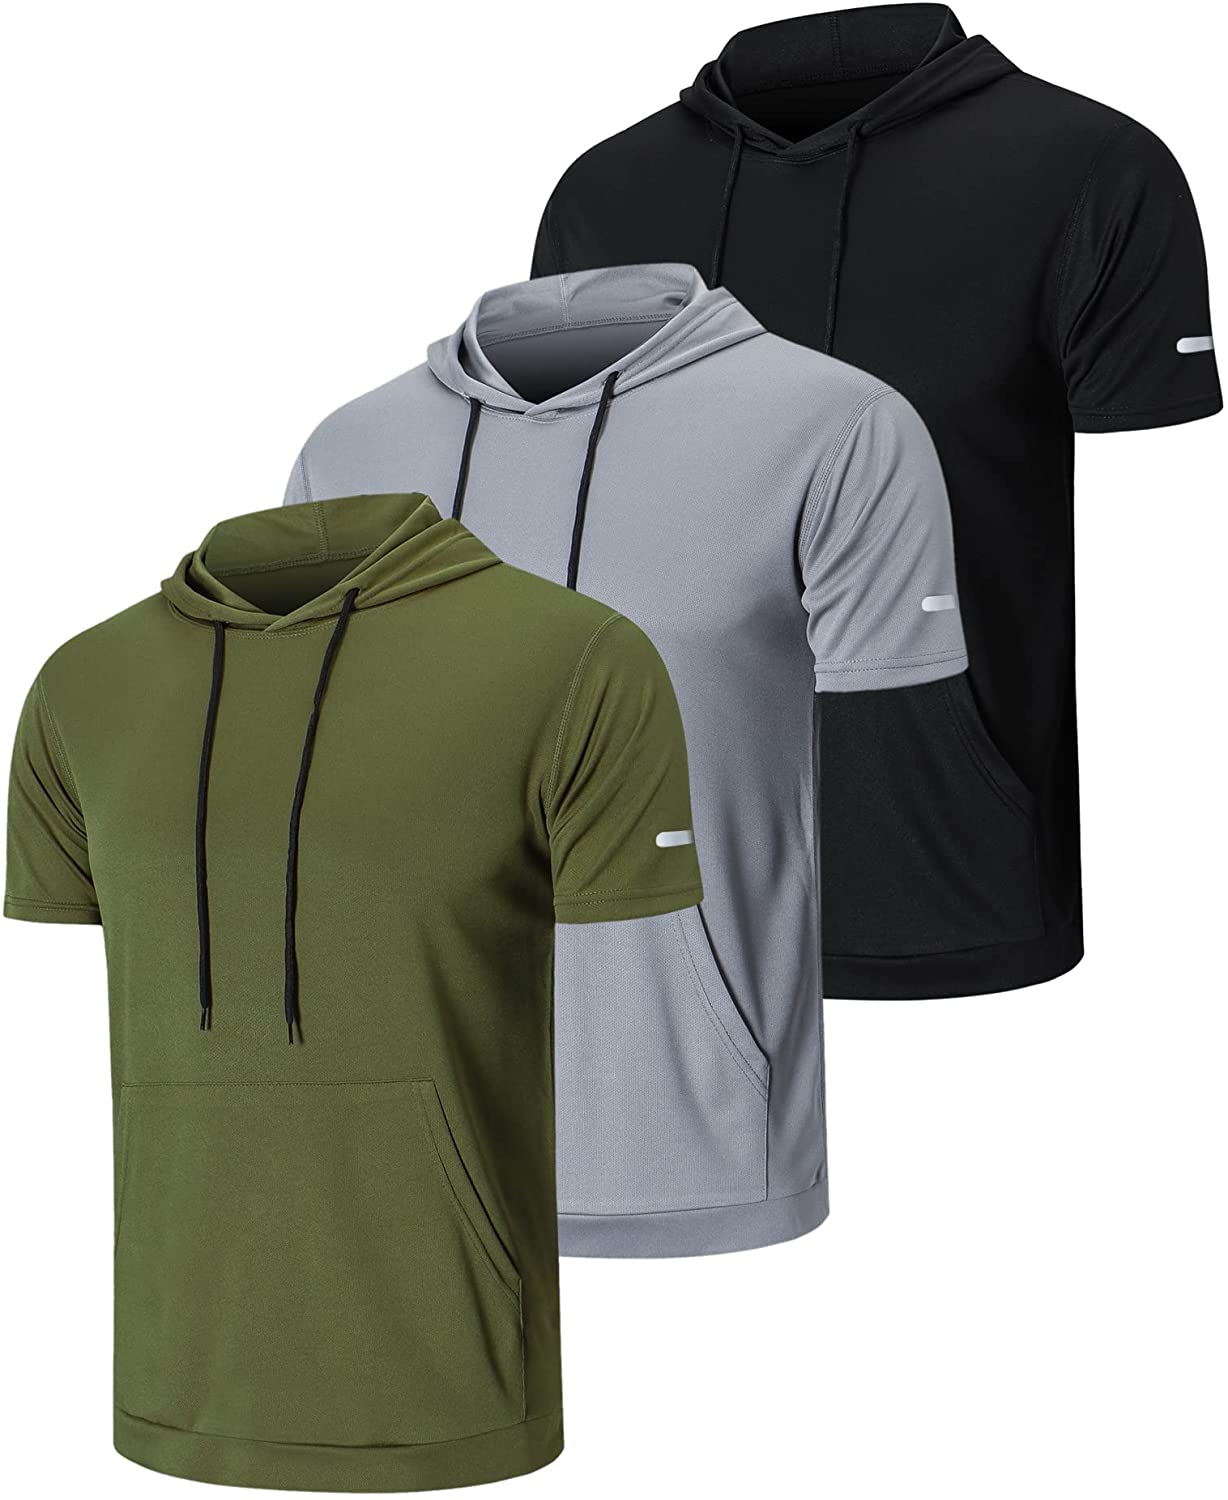 frueo Men's 3 Pack Workout Shirts Dry Fit Moisture Wicking Short Sleeve  Mesh Athletic T-Shirts